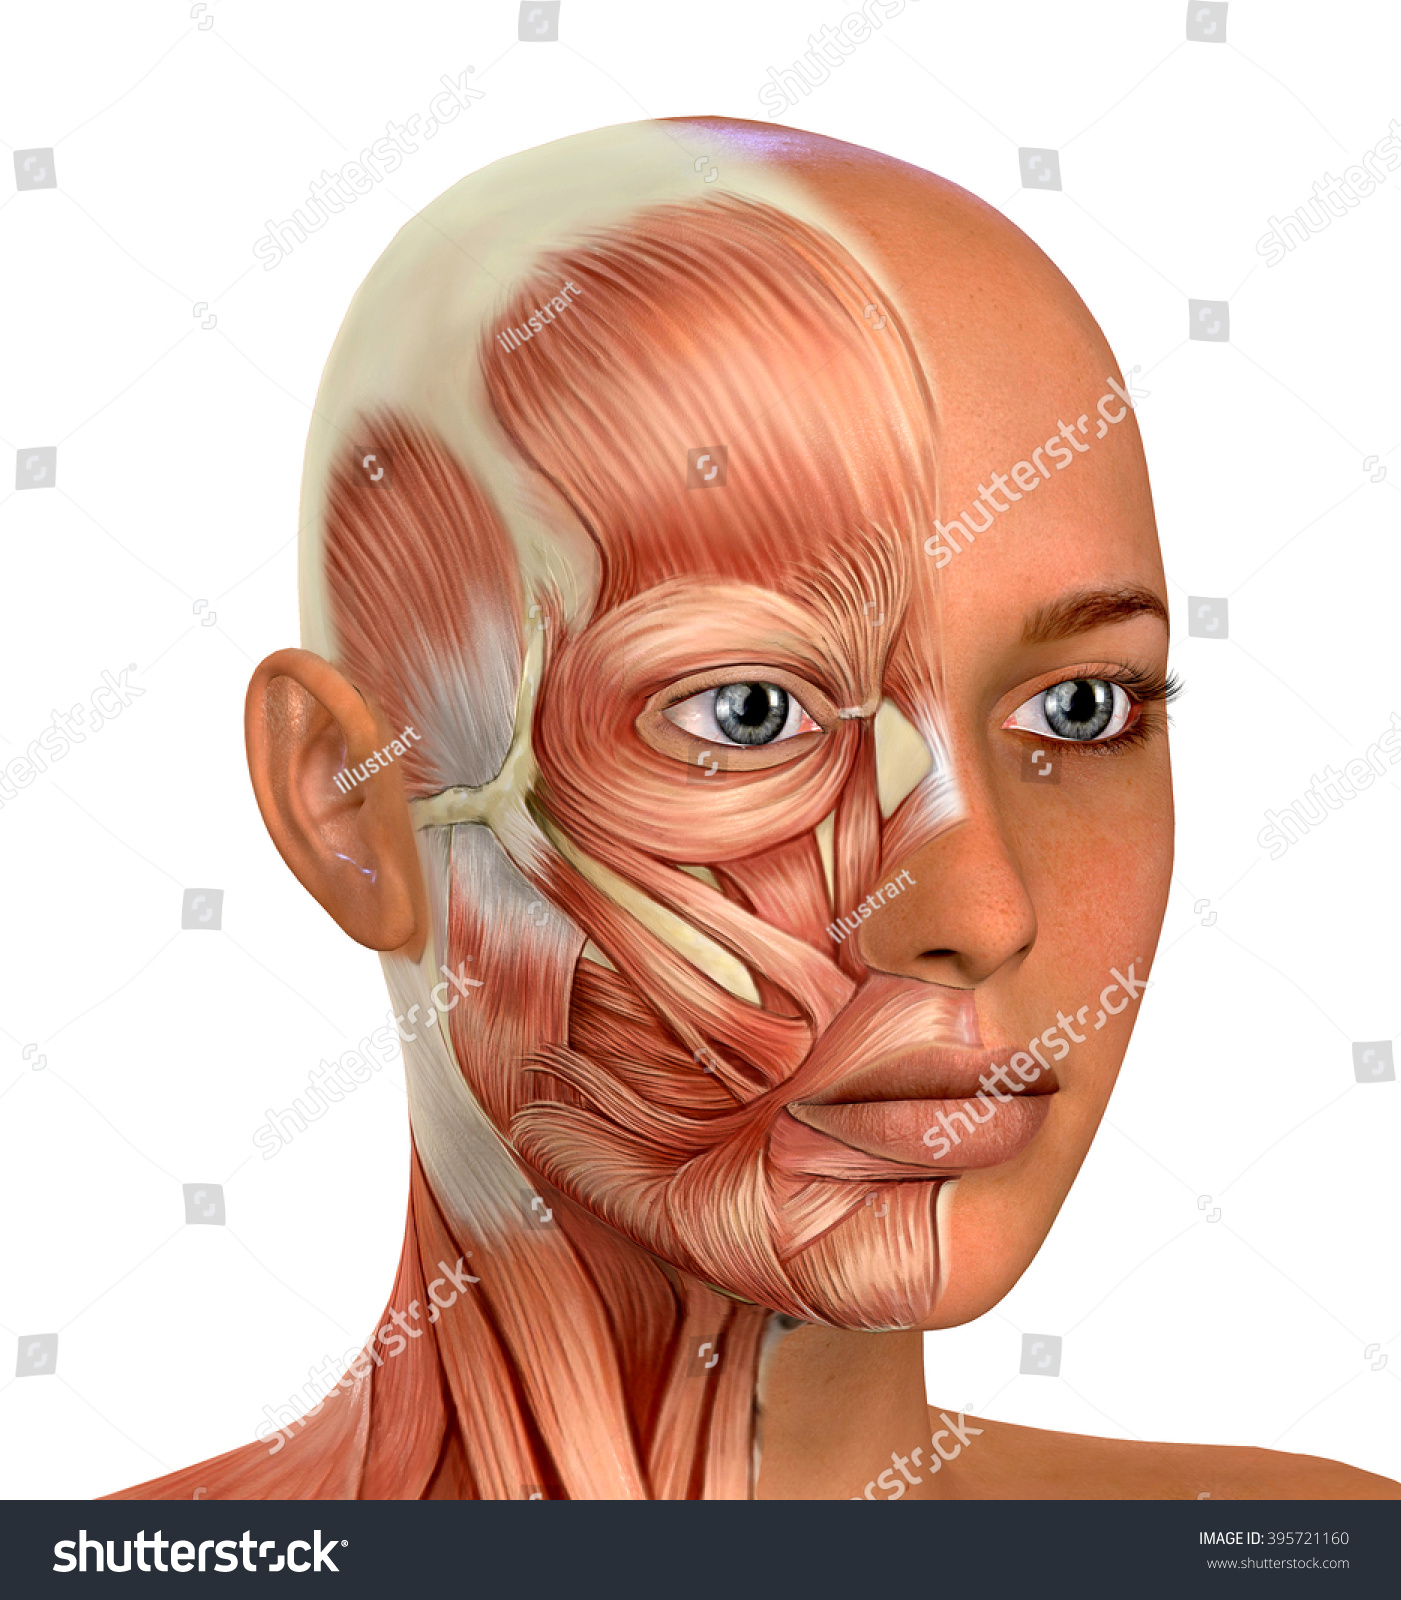 Female Face Muscles Anatomy Stock Photo 395721160 : Shutterstock